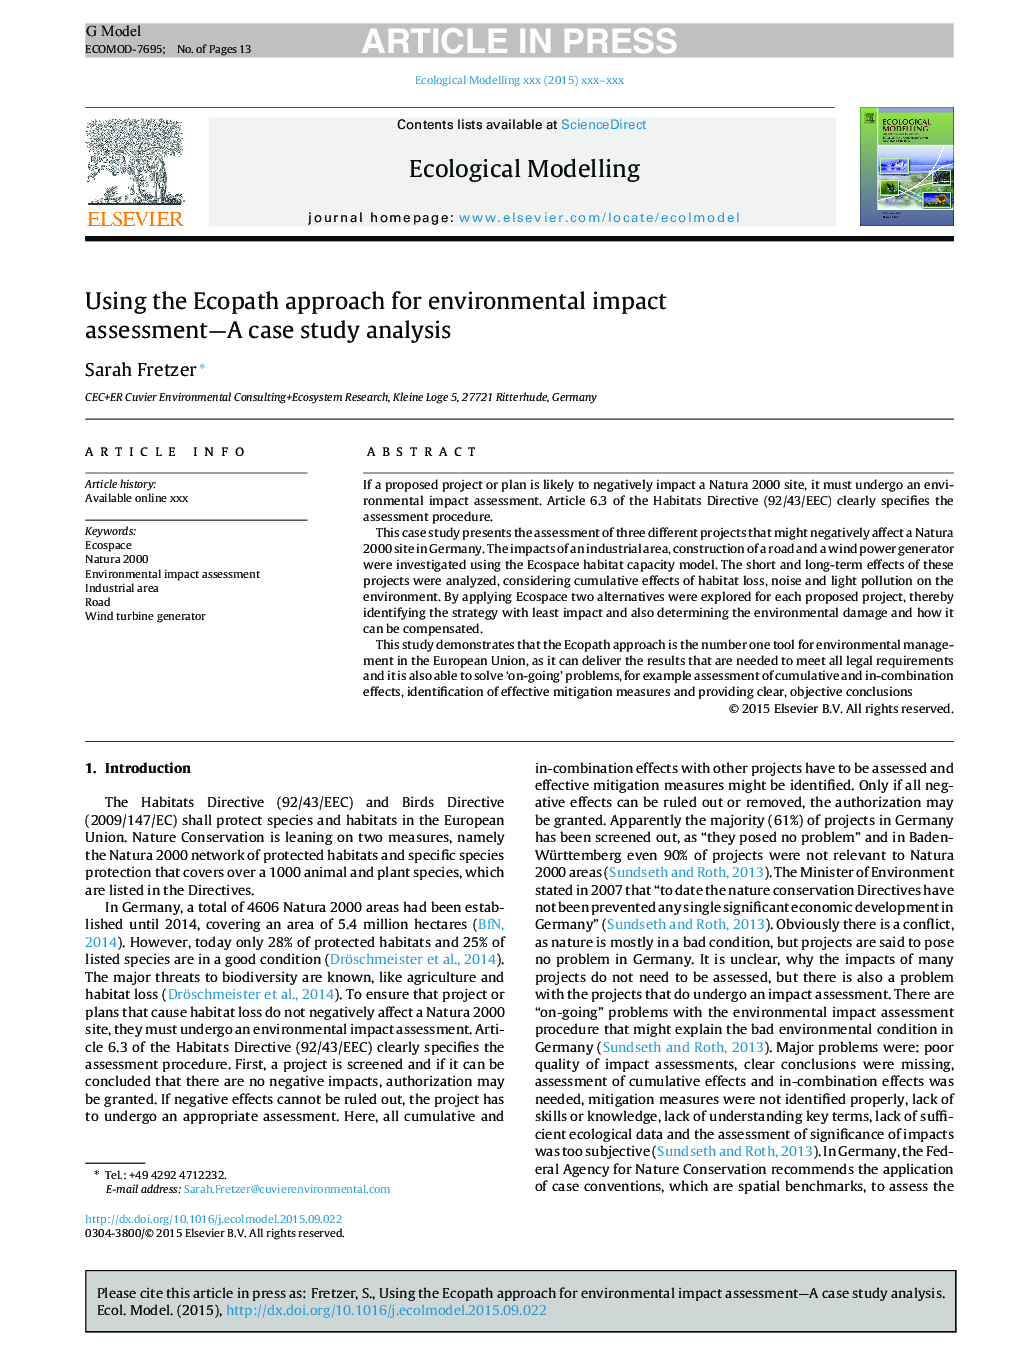 Using the Ecopath approach for environmental impact assessment-A case study analysis